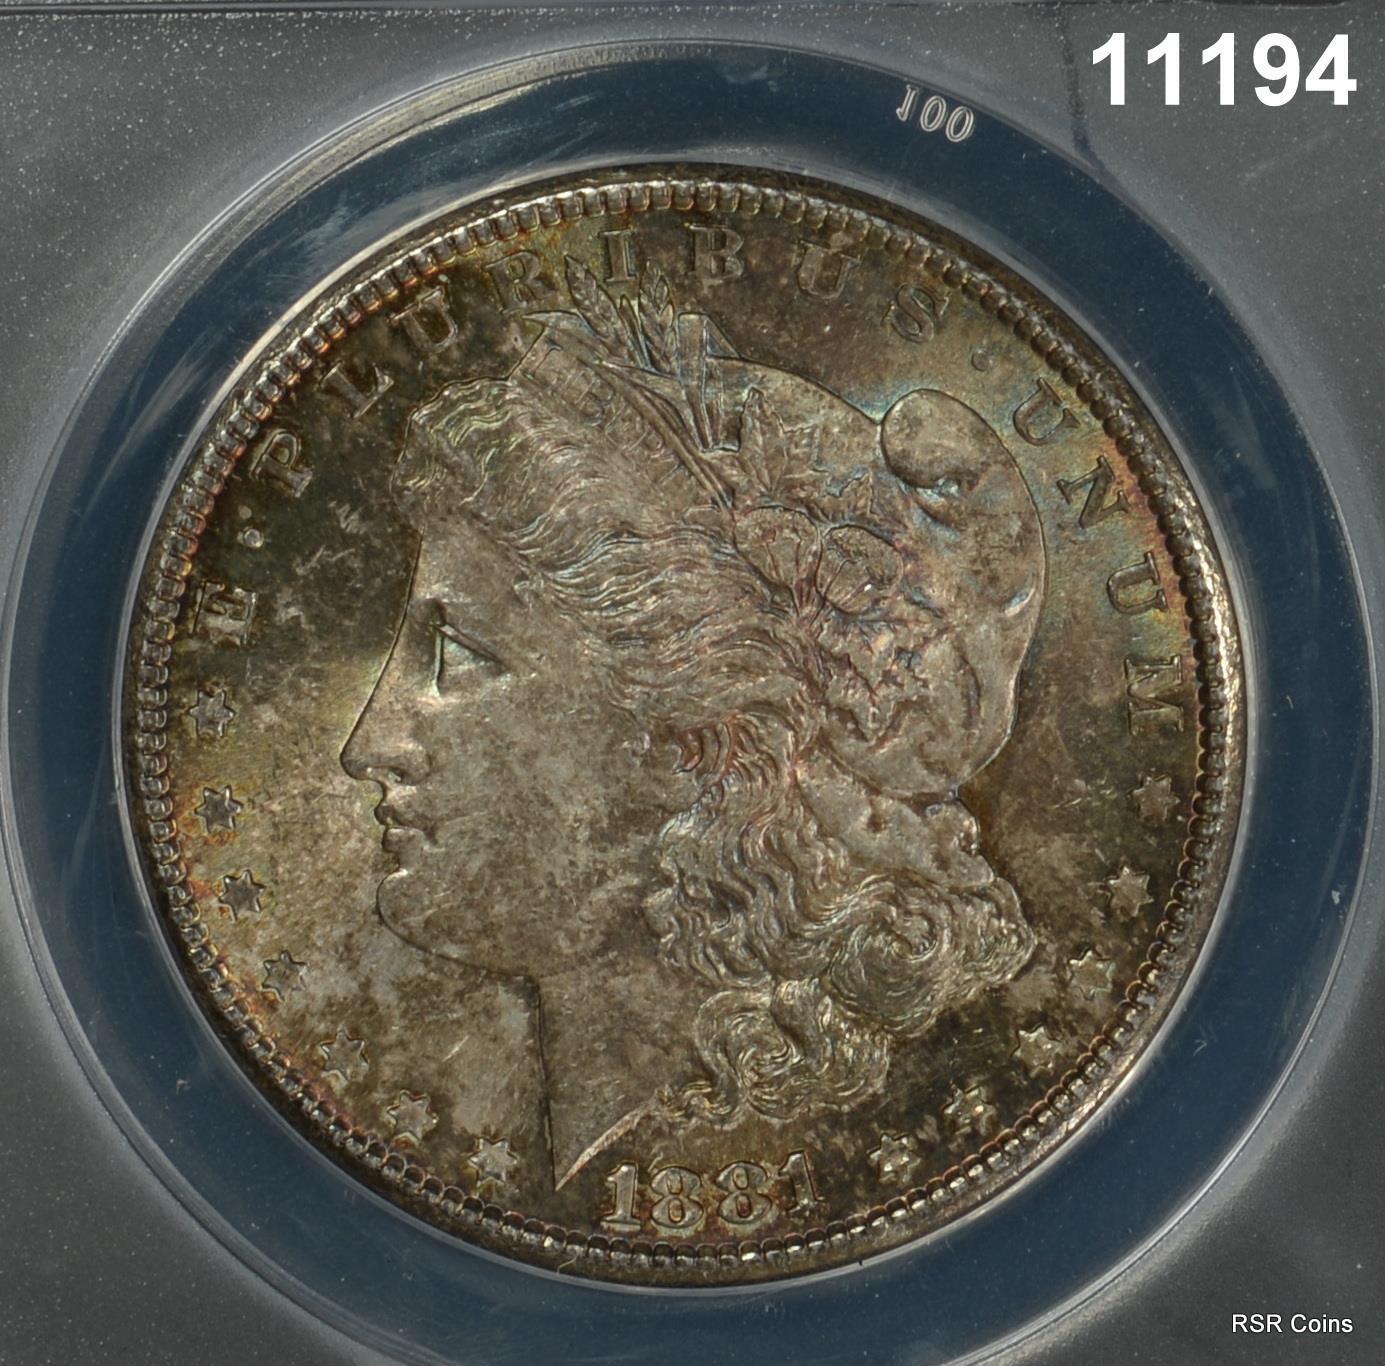 1881 S MORGAN SILVER DOLLAR ANACS CERTIFIED MS64 BLUE, GOLD 2 SIDED WOW #11194